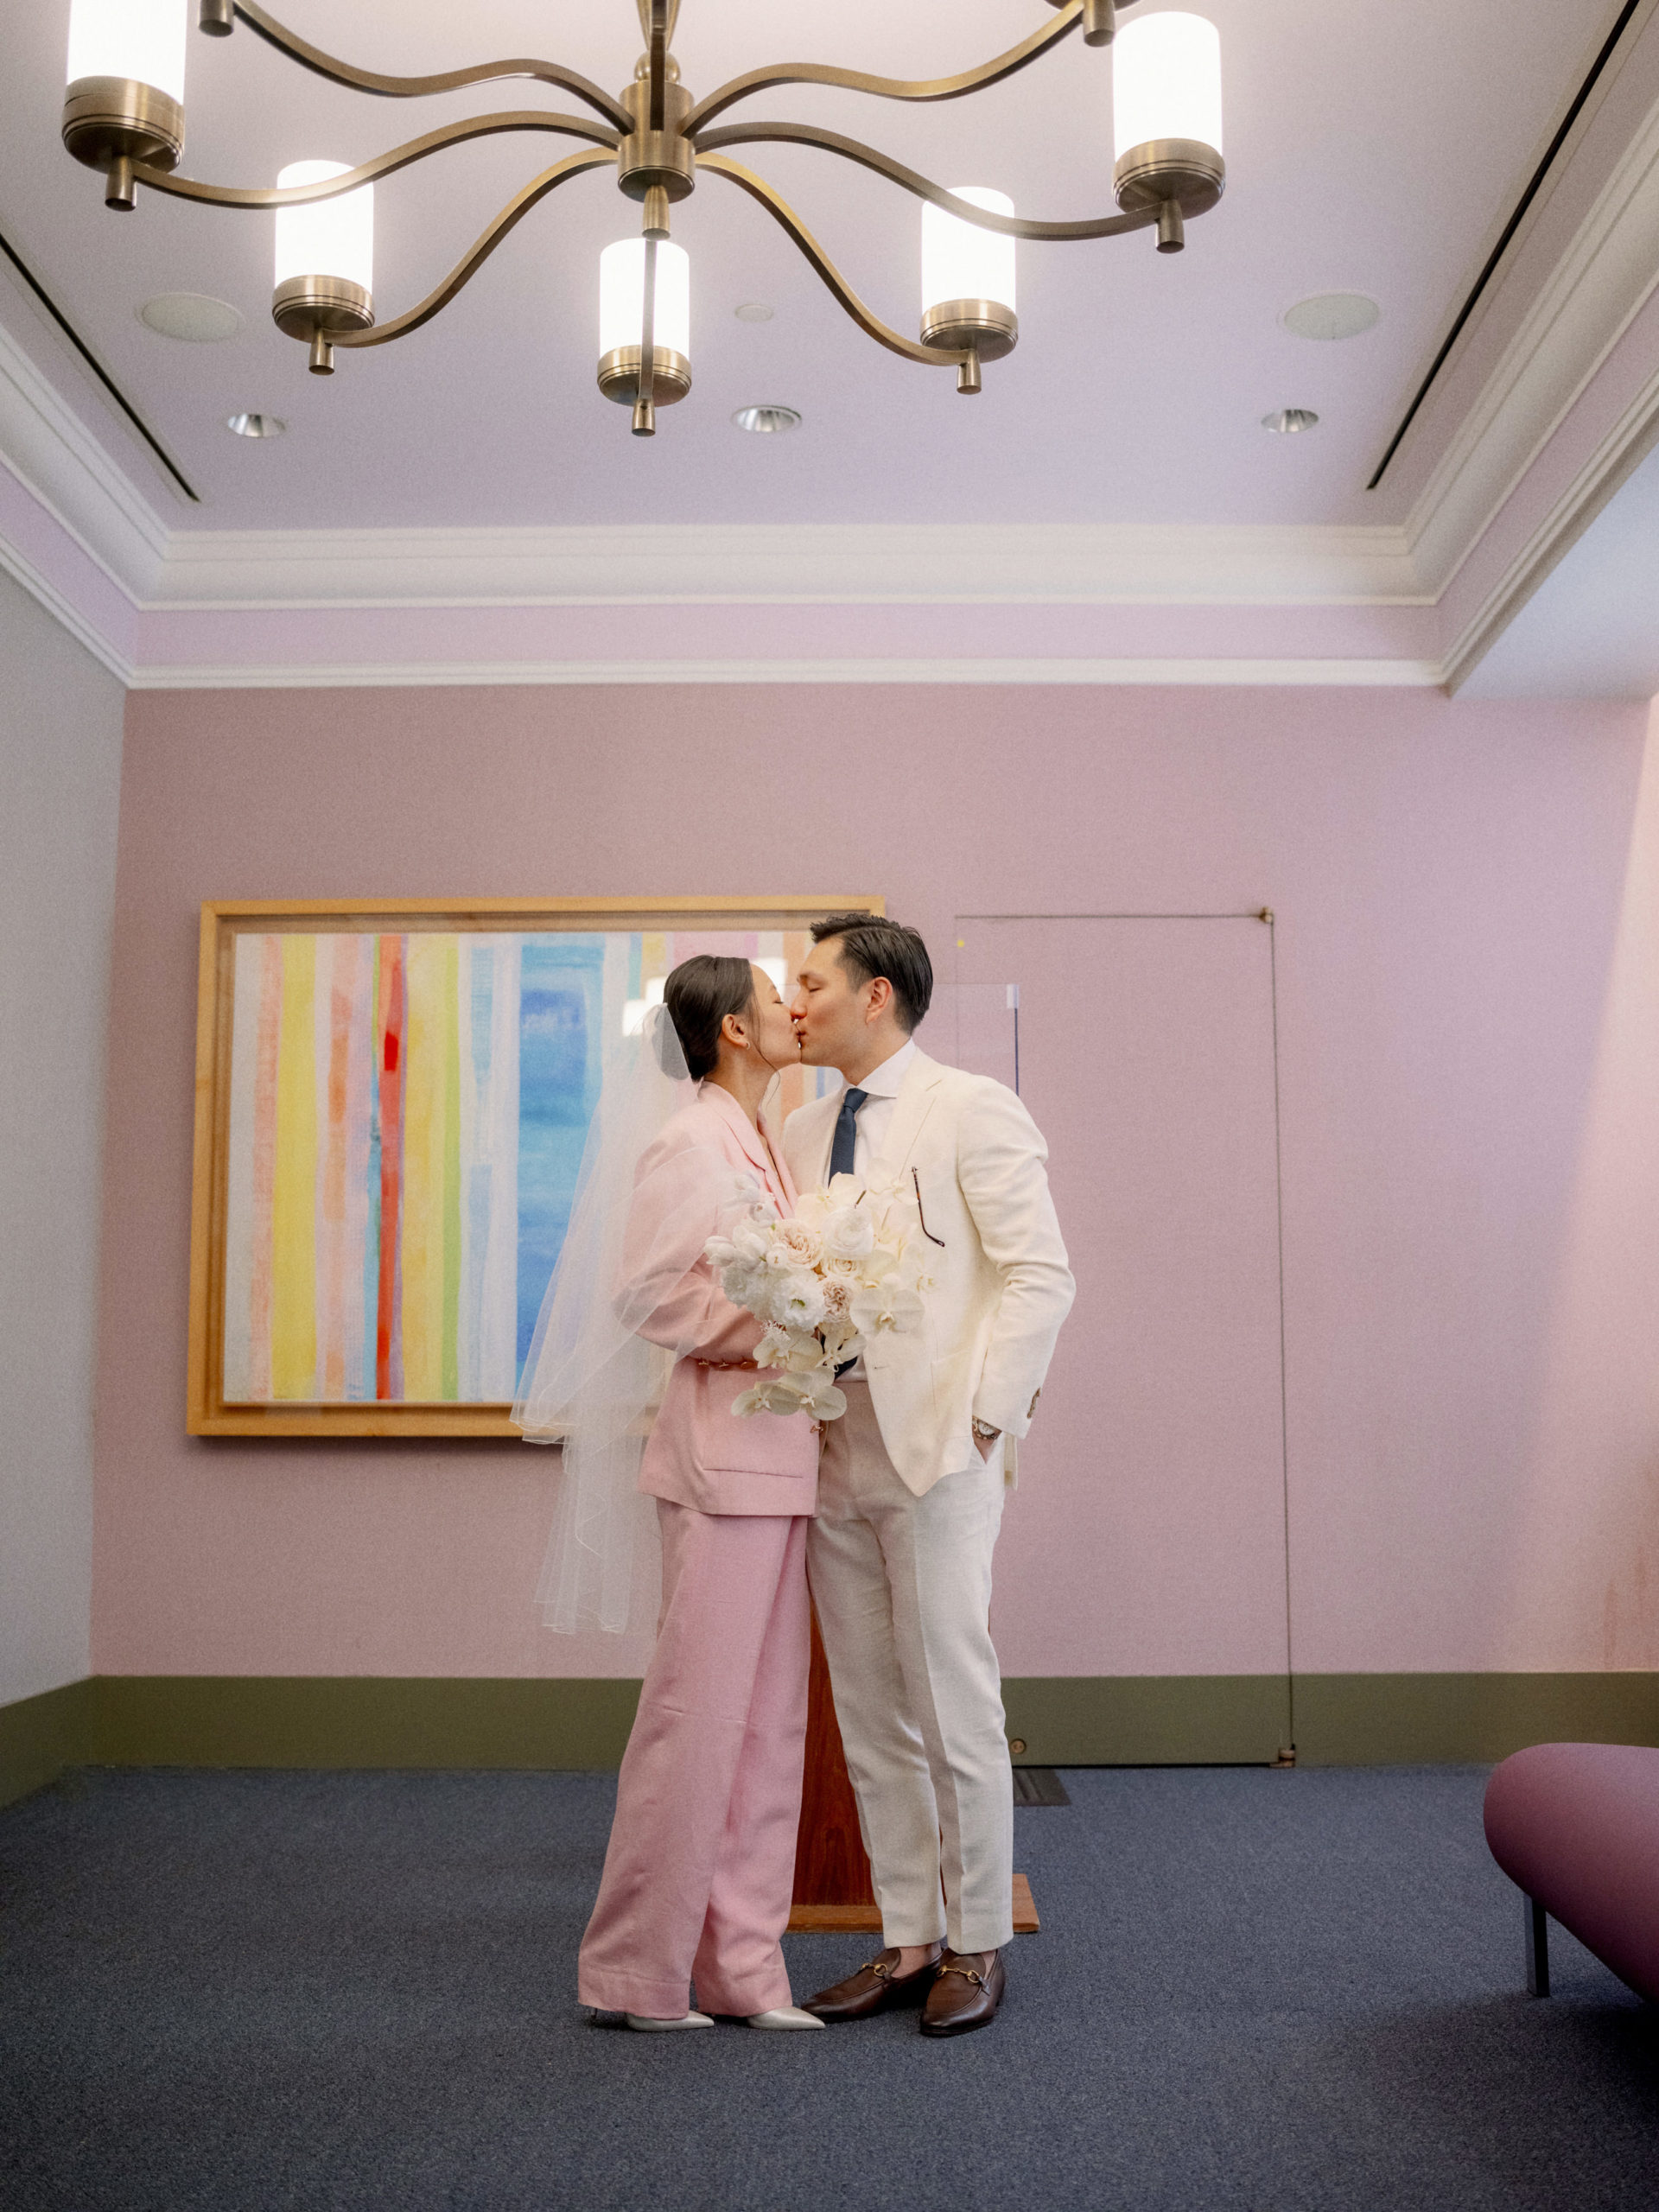 The bride and groom are kissing after the wedding ceremony at NYC City Hall. Editorial elopement image by Jenny Fu Studio.